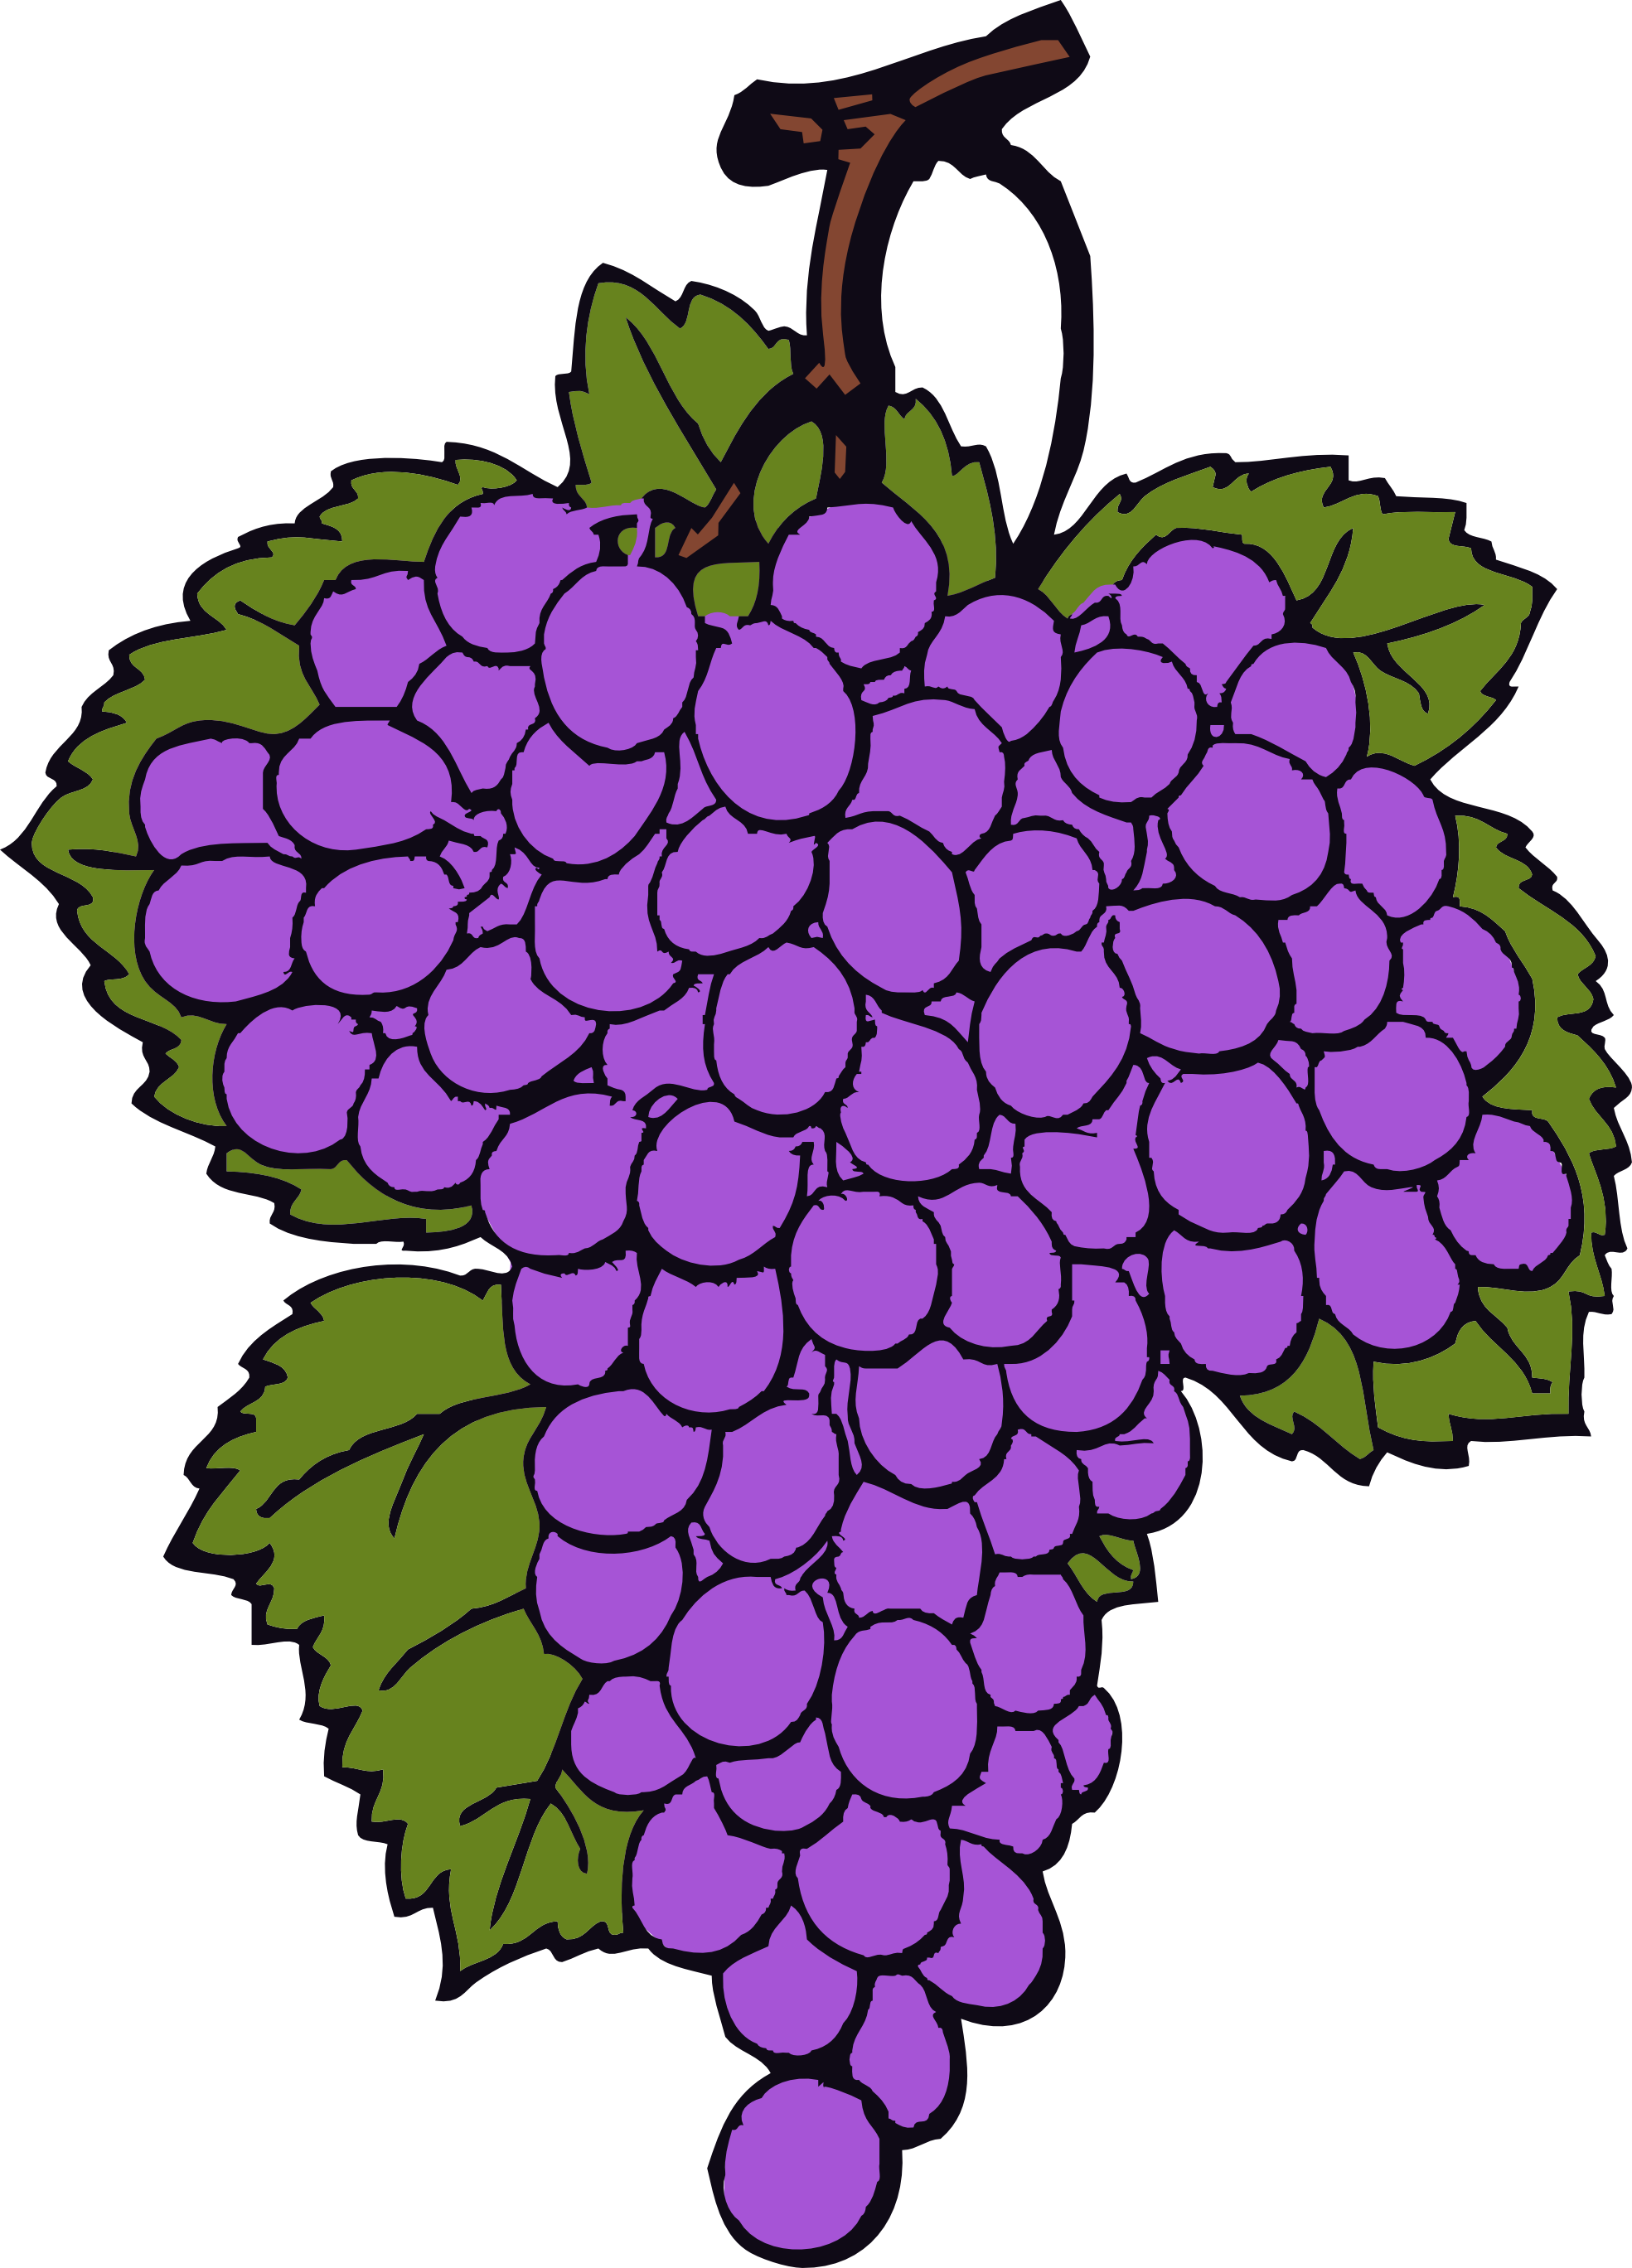 Wine Grapes | Clipart Panda - Free Clipart Images